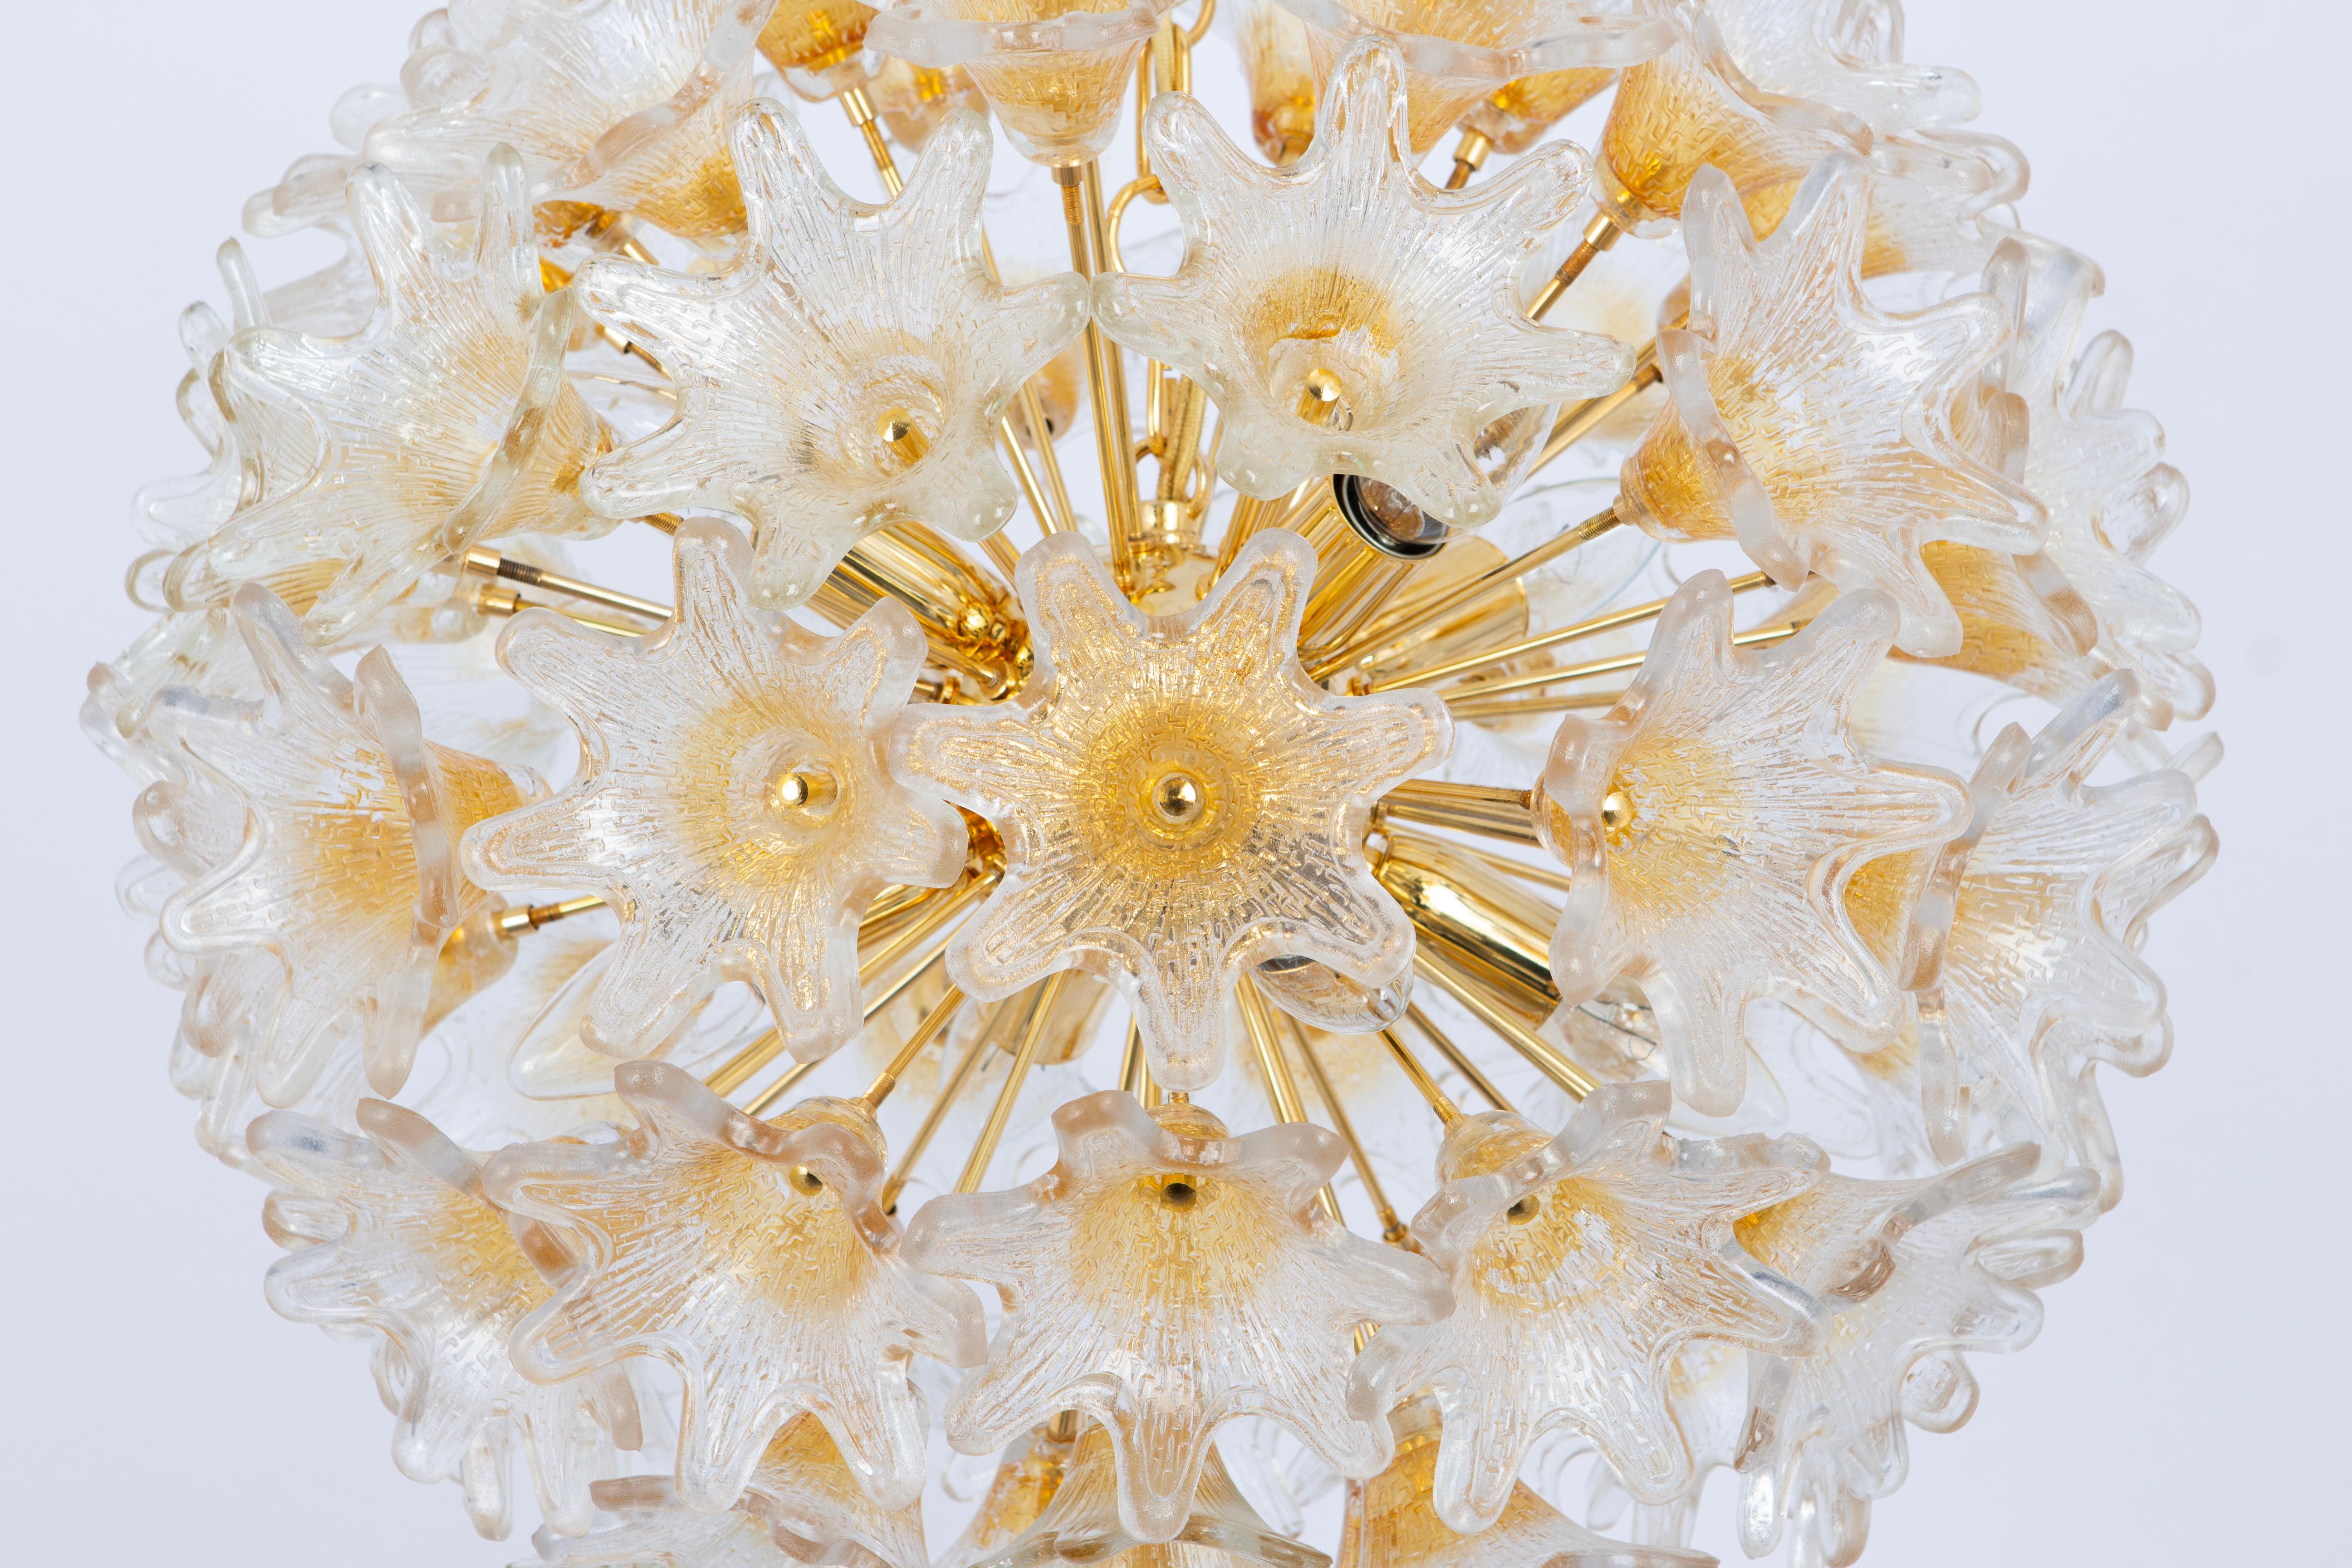 Spectacular Murano glass and brass sunburst flower chandelier by Venini for VeArt, Italy 1970s
Stunning shape and a great light effect.
All glasses are in good condition.
It needs 8 small-size bulbs (E-14 bulbs) up to 40 watts.
Light bulbs are not